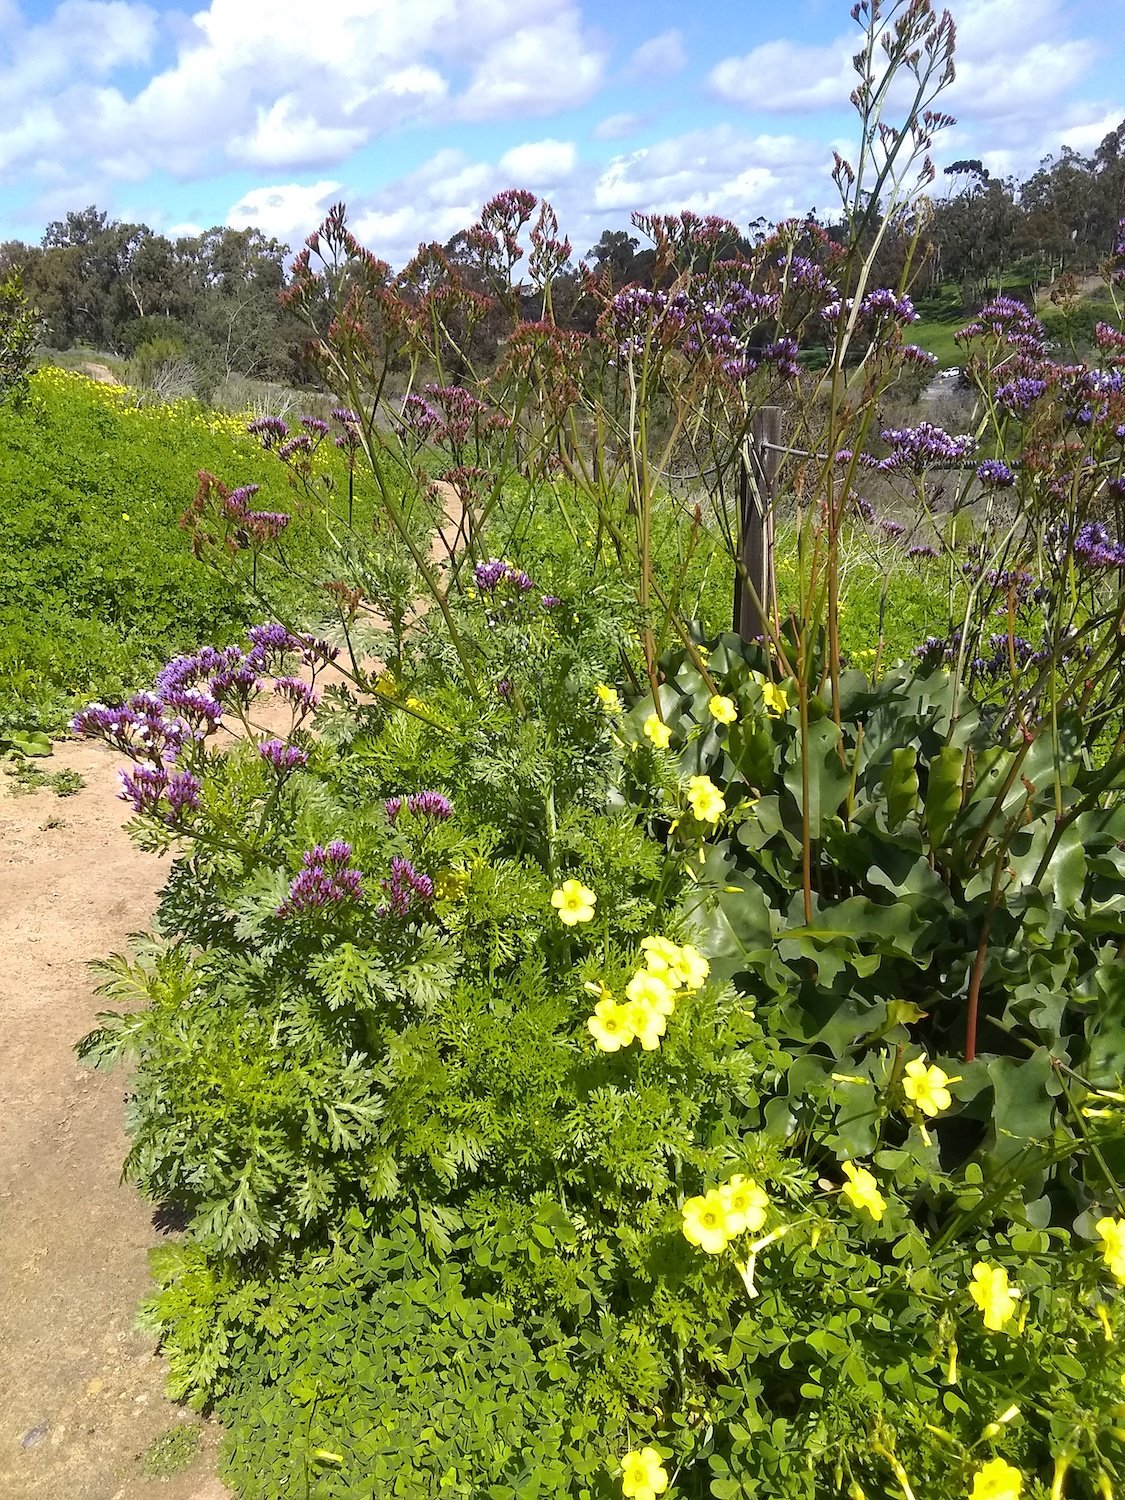 San Diego bike trail called Florida Canyon Trail featuring native flowers